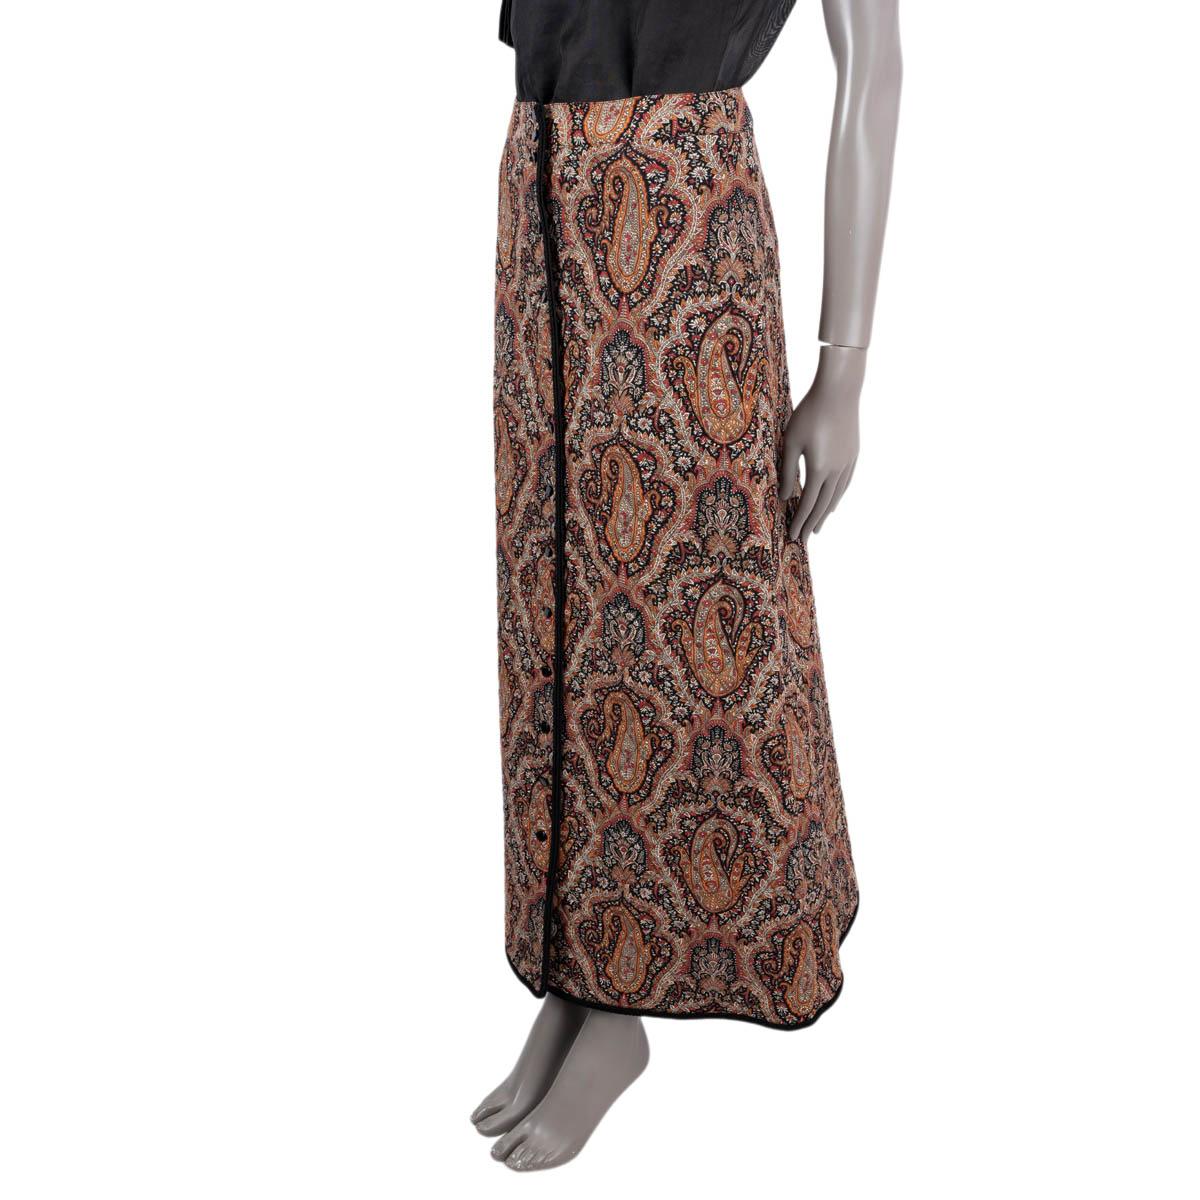 100% authentic Celine 2020 buttoned and quilted paisley maxi skirt in black, beige, orange, red and ecru wool (100%) with a black silk (100%) lining. The design features a black embroidered hem, quilt stitching and two slit side pockets. Has been